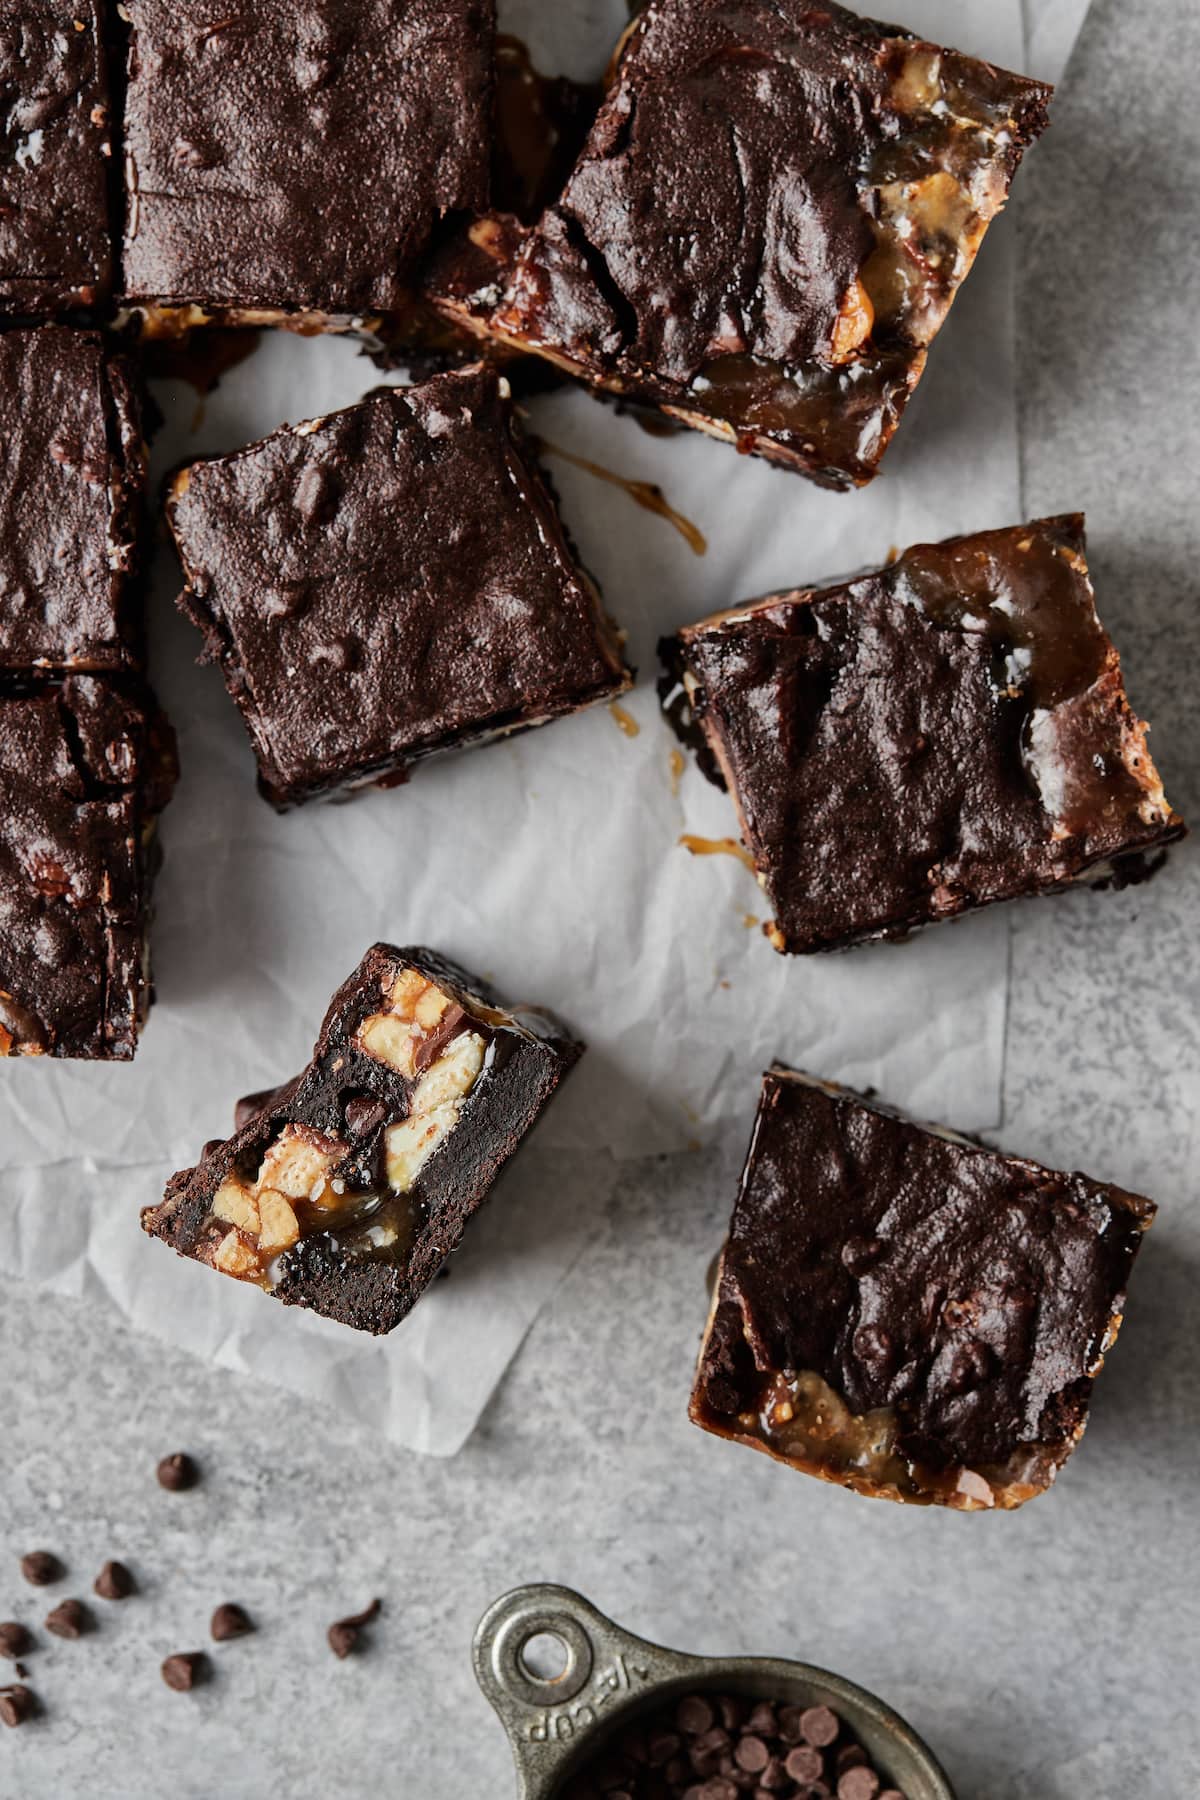 Snickers brownies scattered on parchment paper.